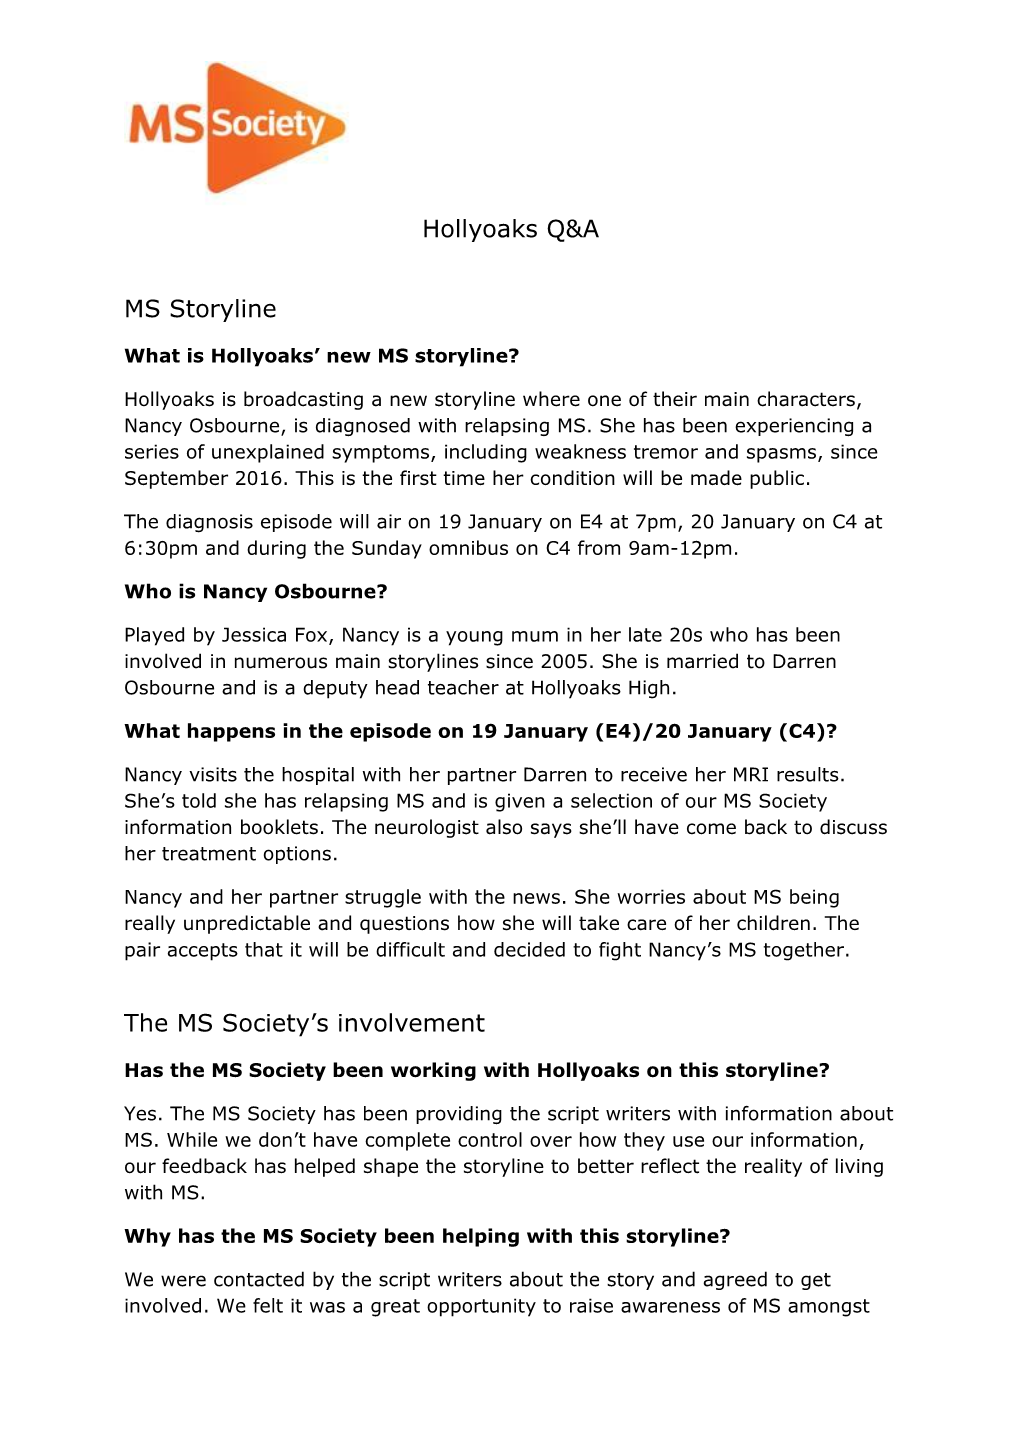 Hollyoaks Q&A MS Storyline the MS Society's Involvement